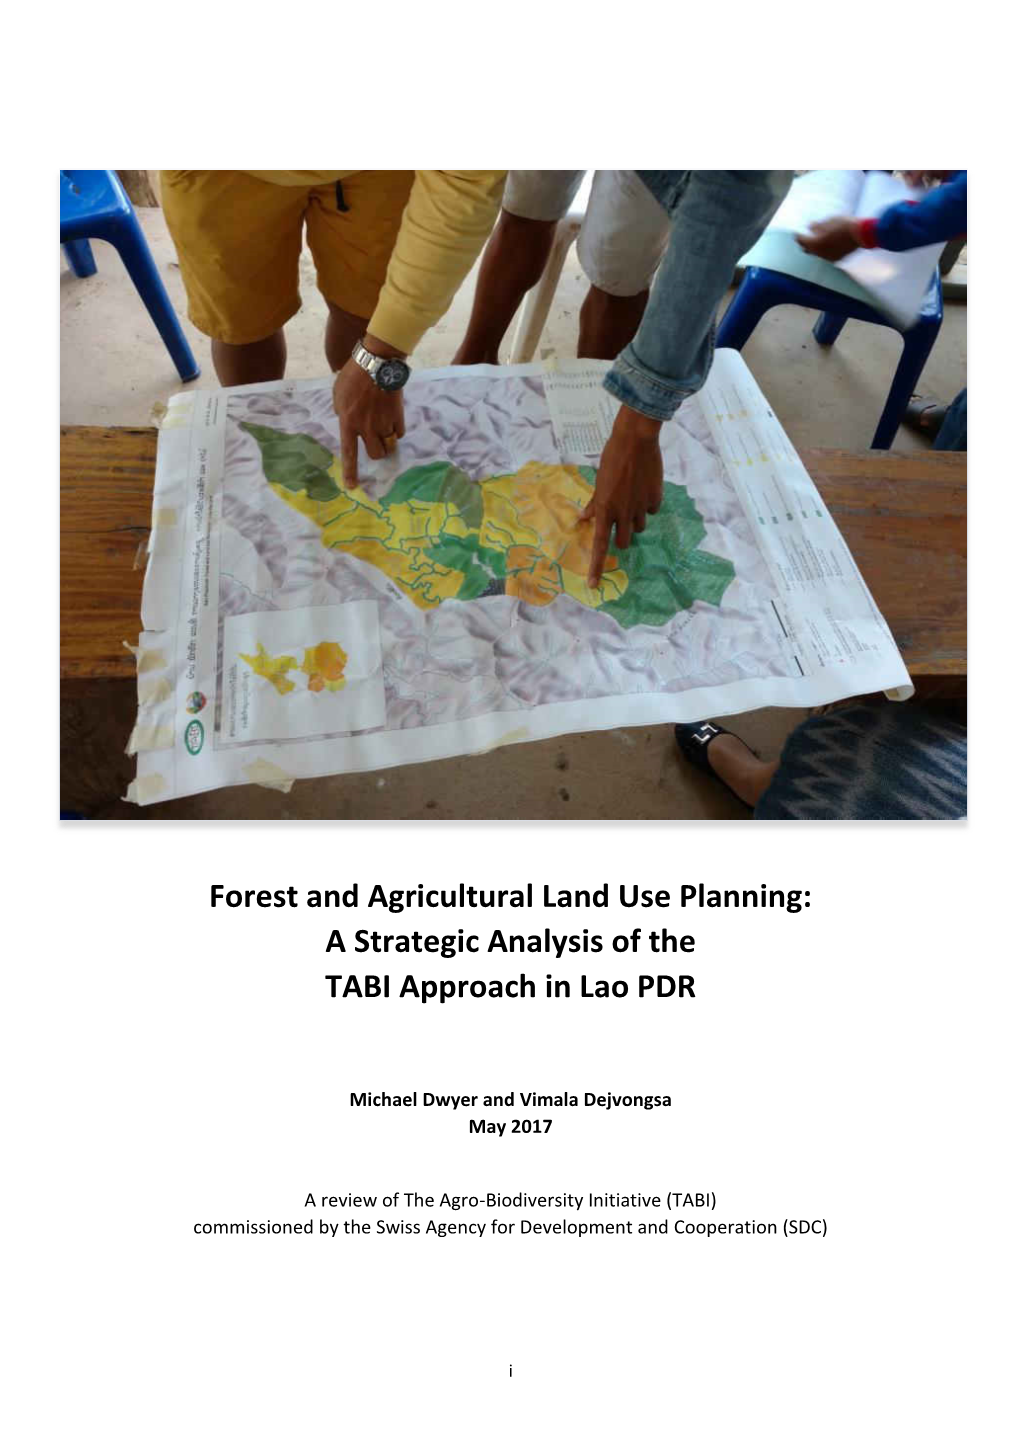 A Strategic Analysis of the TABI Approach in Lao PDR